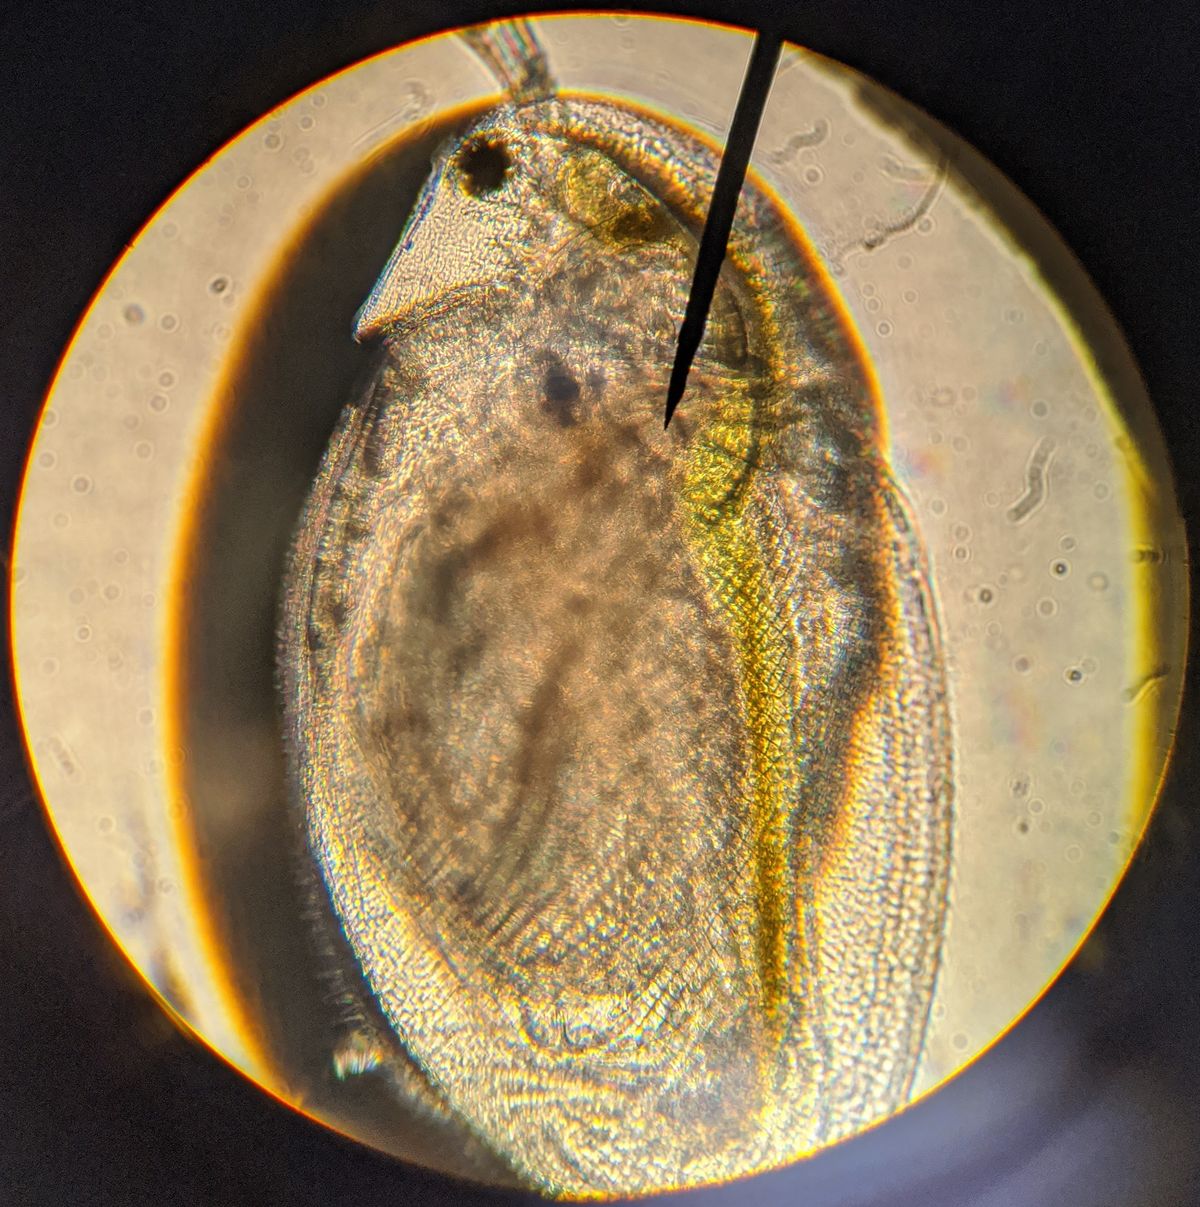 a daphnia, with a rounded, transparent body with green stripe running through its center, is lain on a taupe-colored slide under a microscope. a black needle points towards the front of the <em>Daphnia</em> and the image is constrained by a black circle. 